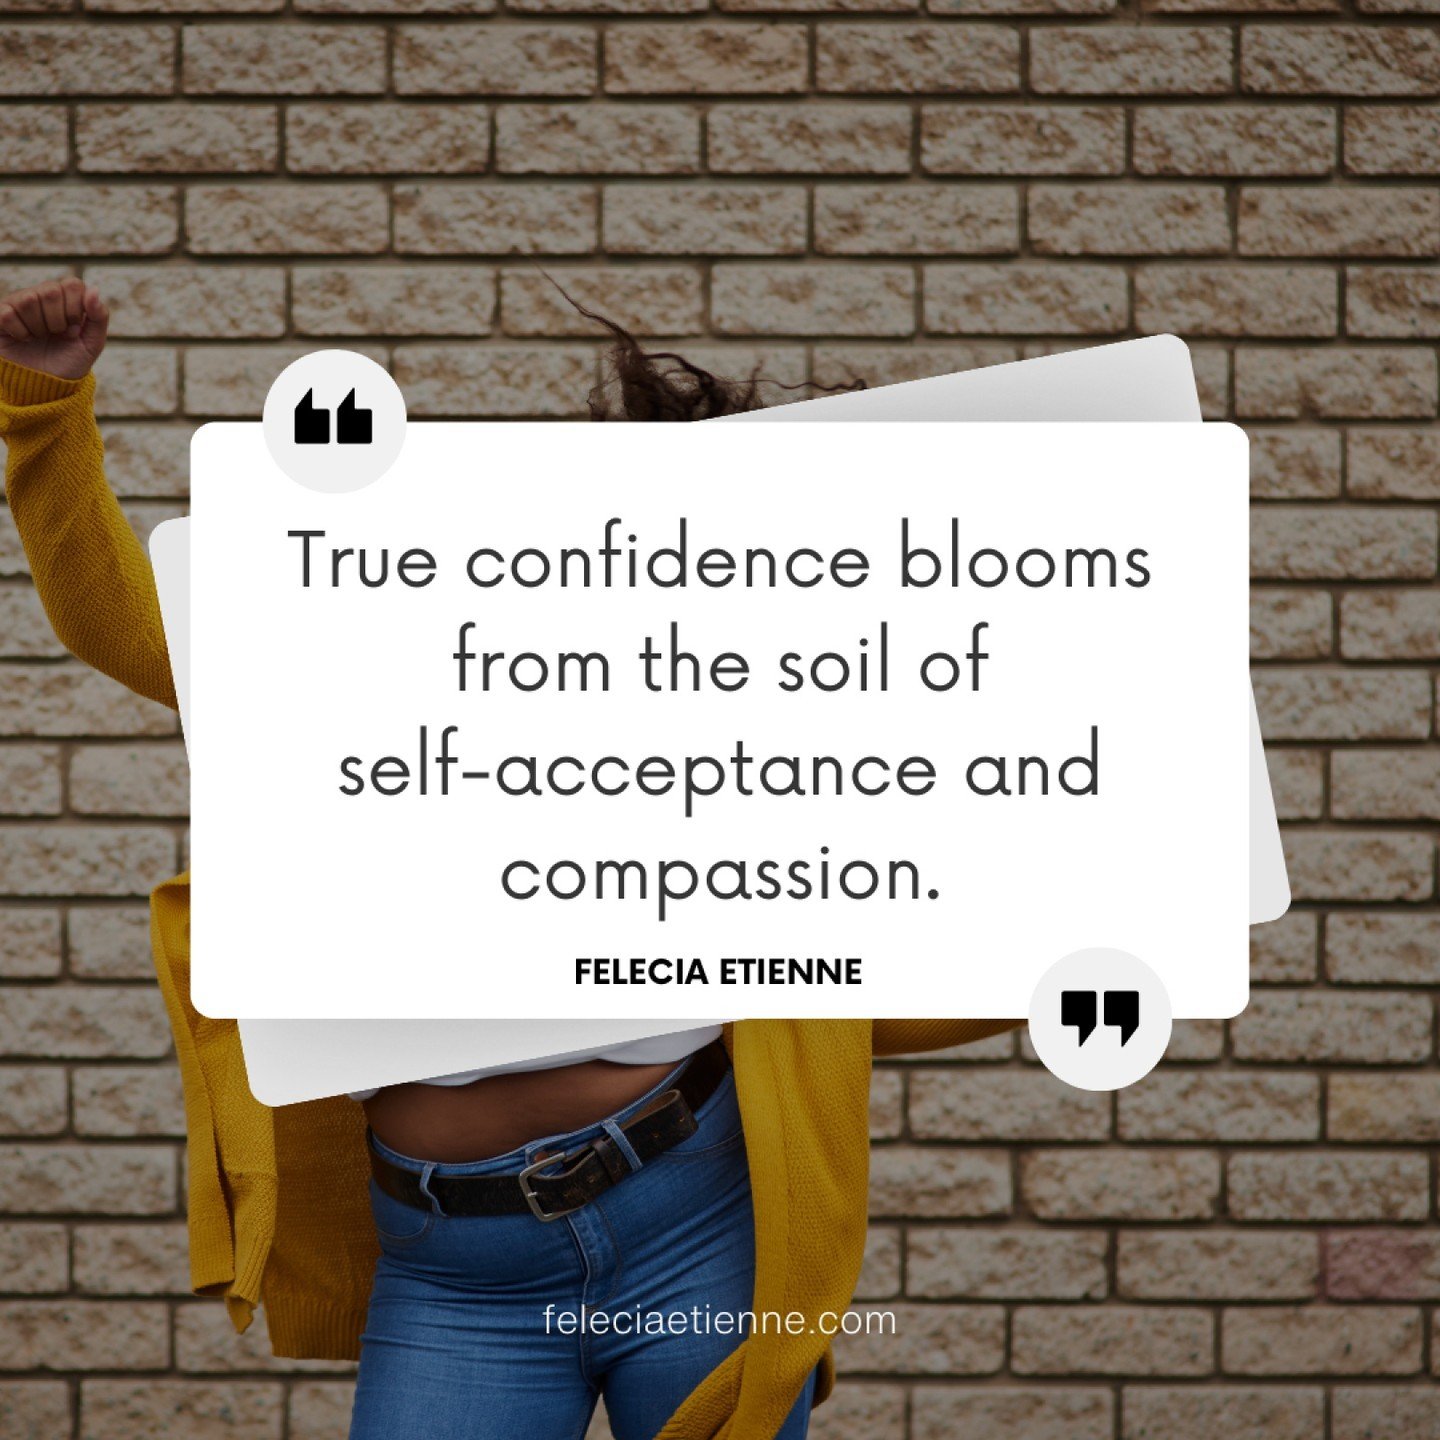 Real confidence starts from within &ndash; with self-acceptance and compassion. When you embrace who you are, flaws and all, and treat yourself with kindness, that's when confidence truly blossoms.

❌ Avoid seeking confidence from external sources li